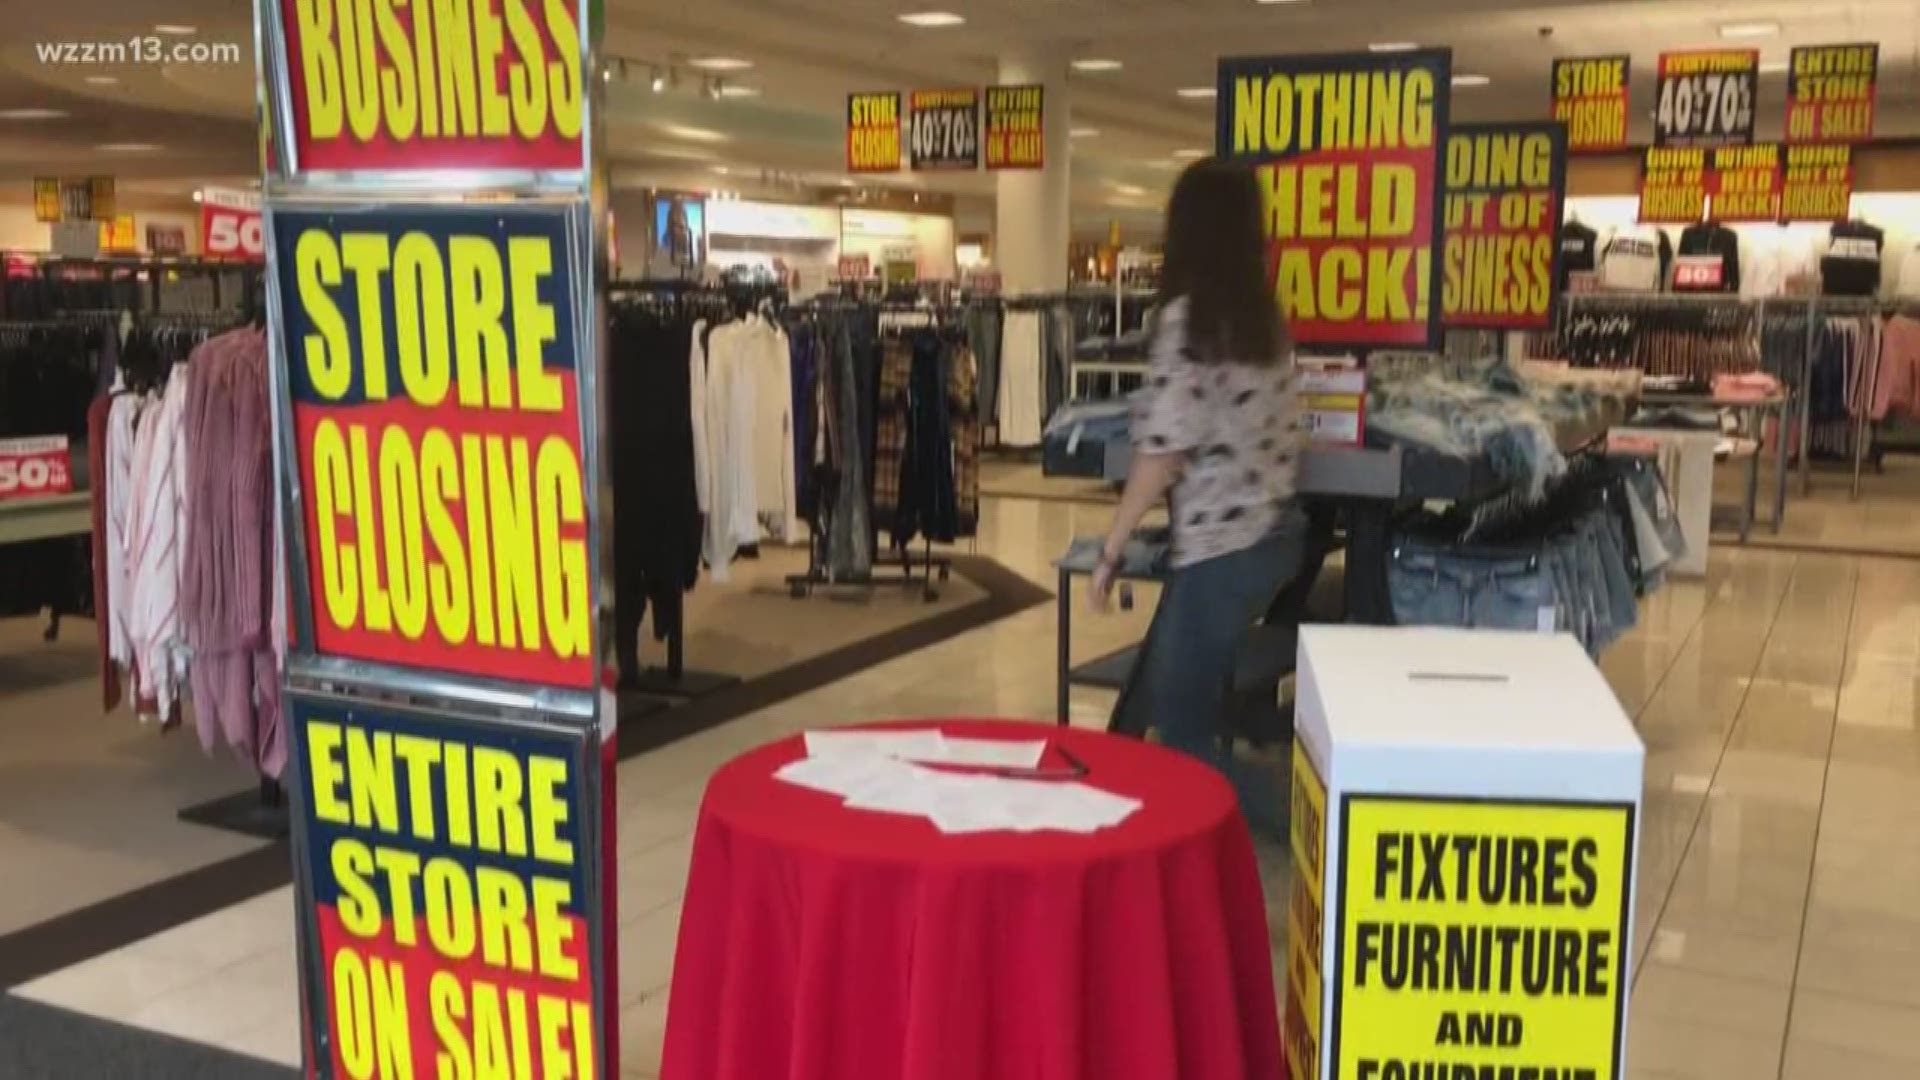 Retailers holding going out of business sales